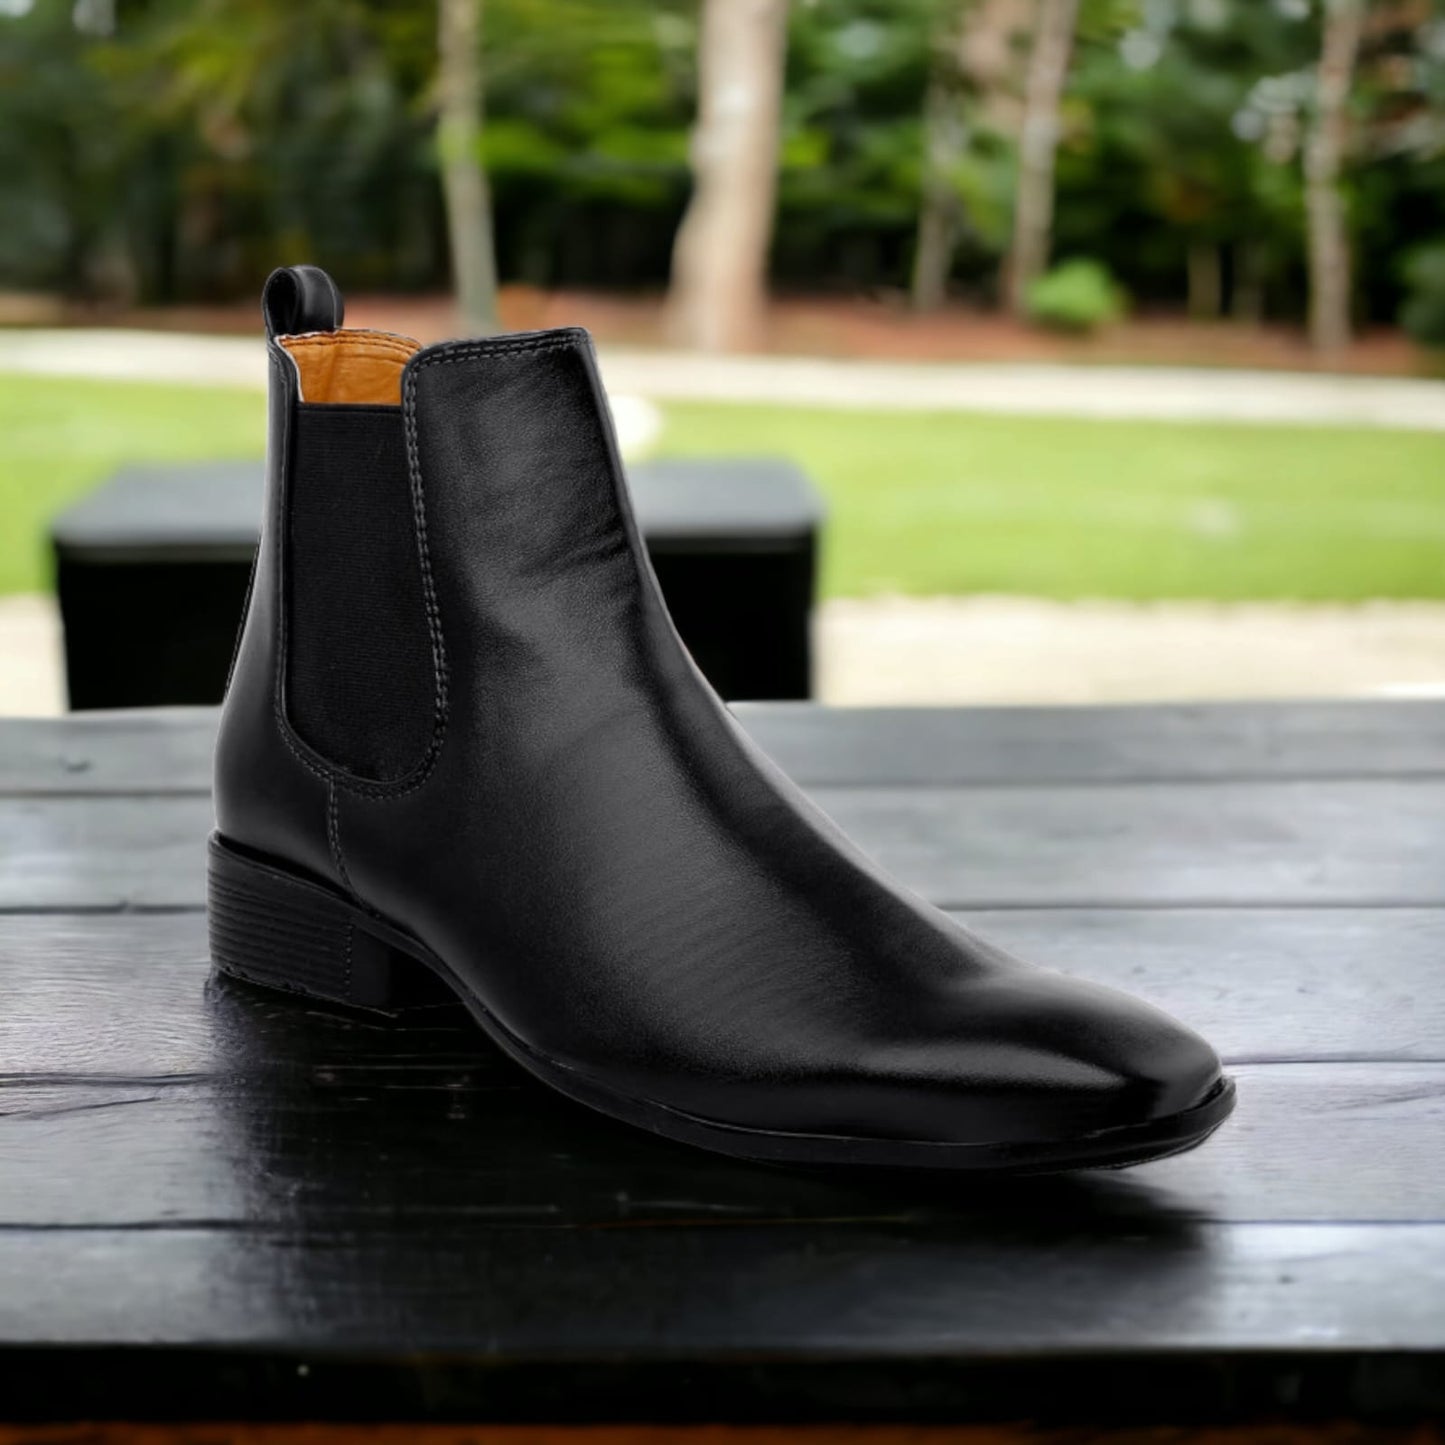 Jack Marc Men's Stylish Black Formal and Casual Wear British Chelsea Ankle Boots